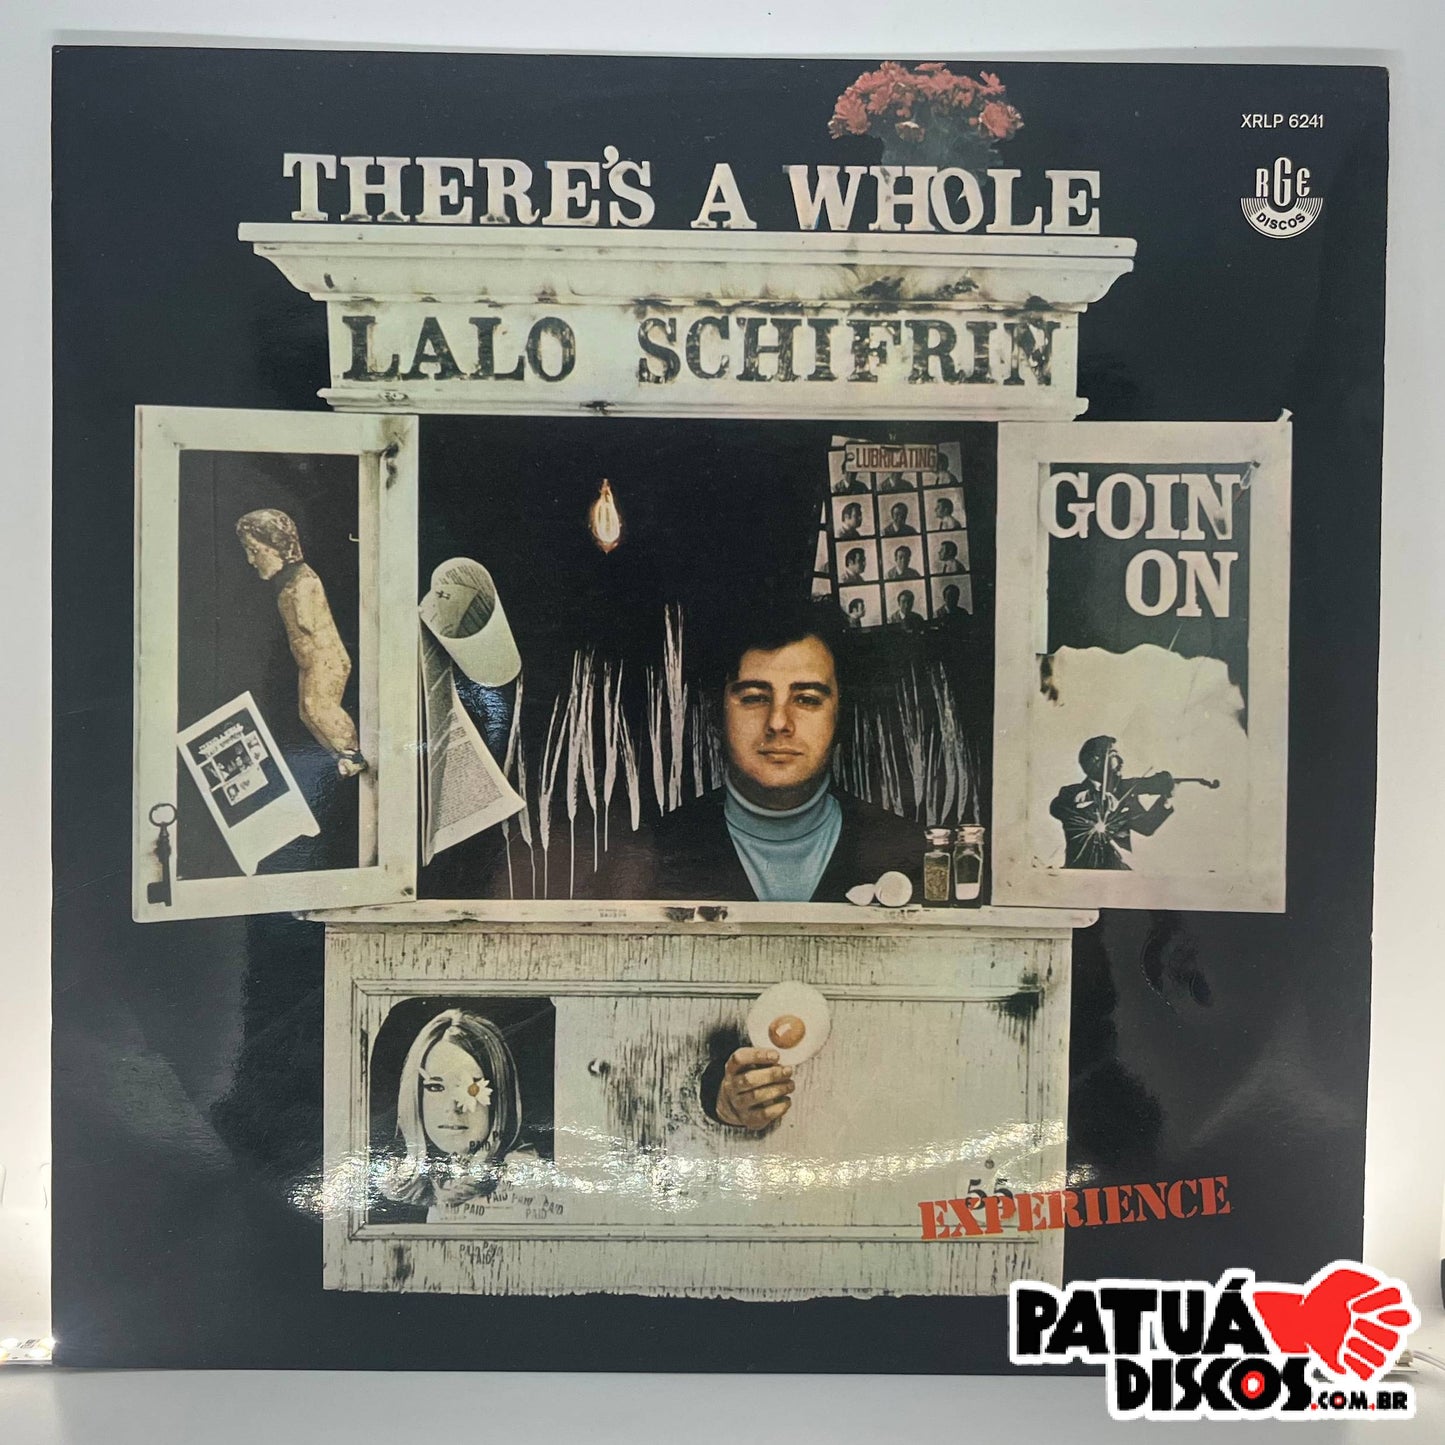 Lalo Schifrin - Experience (There's A Whole Lalo Schifrin Goin' On) - LP